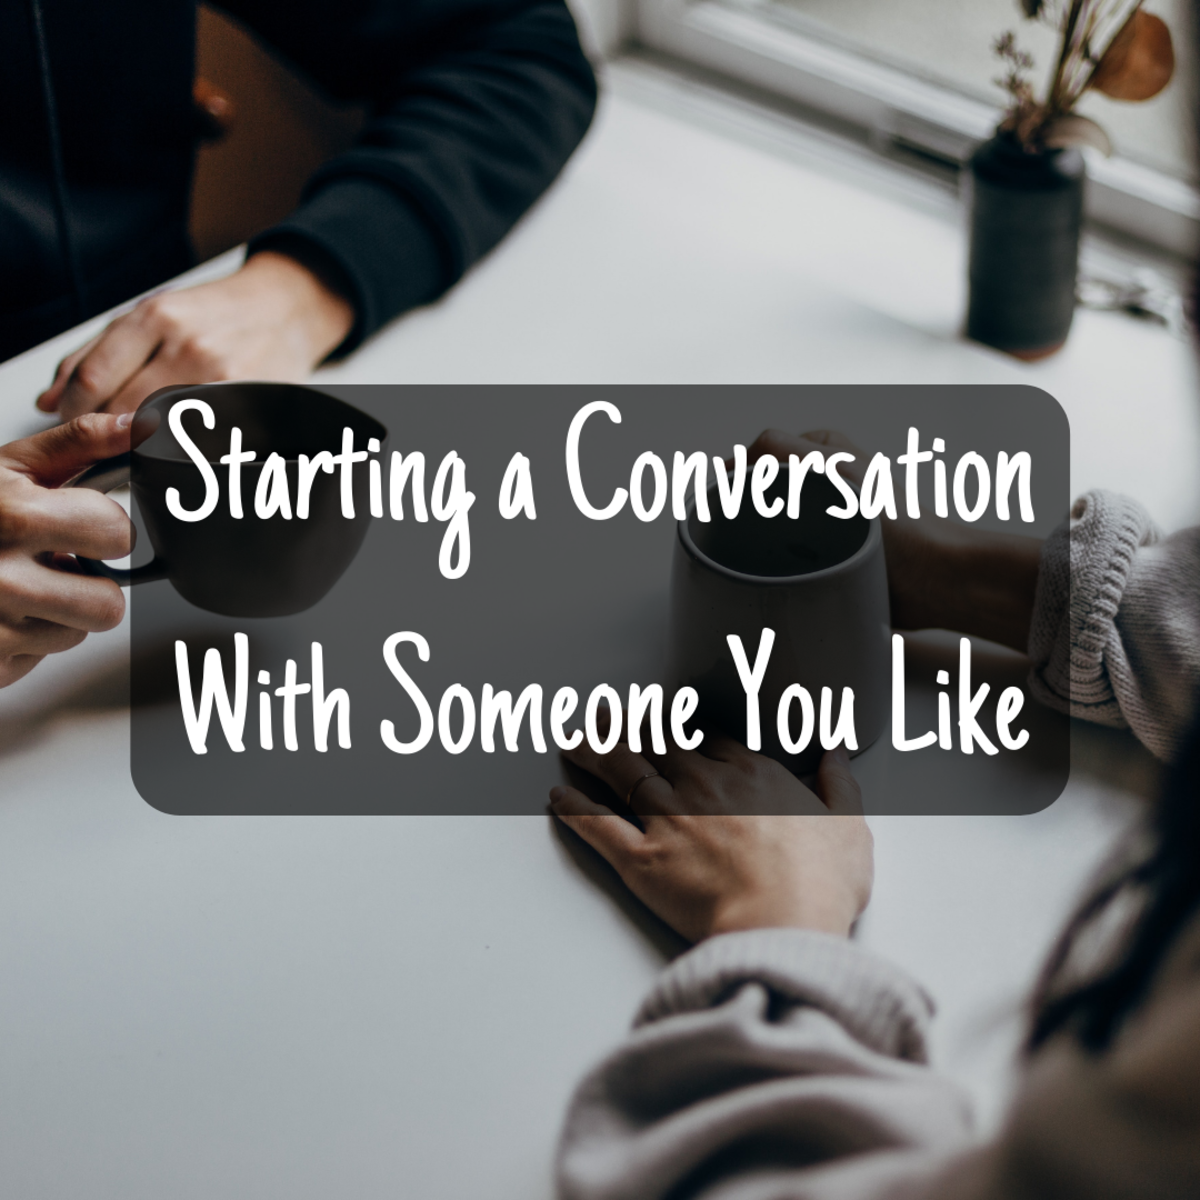 How to Start a Conversation With Someone You Like